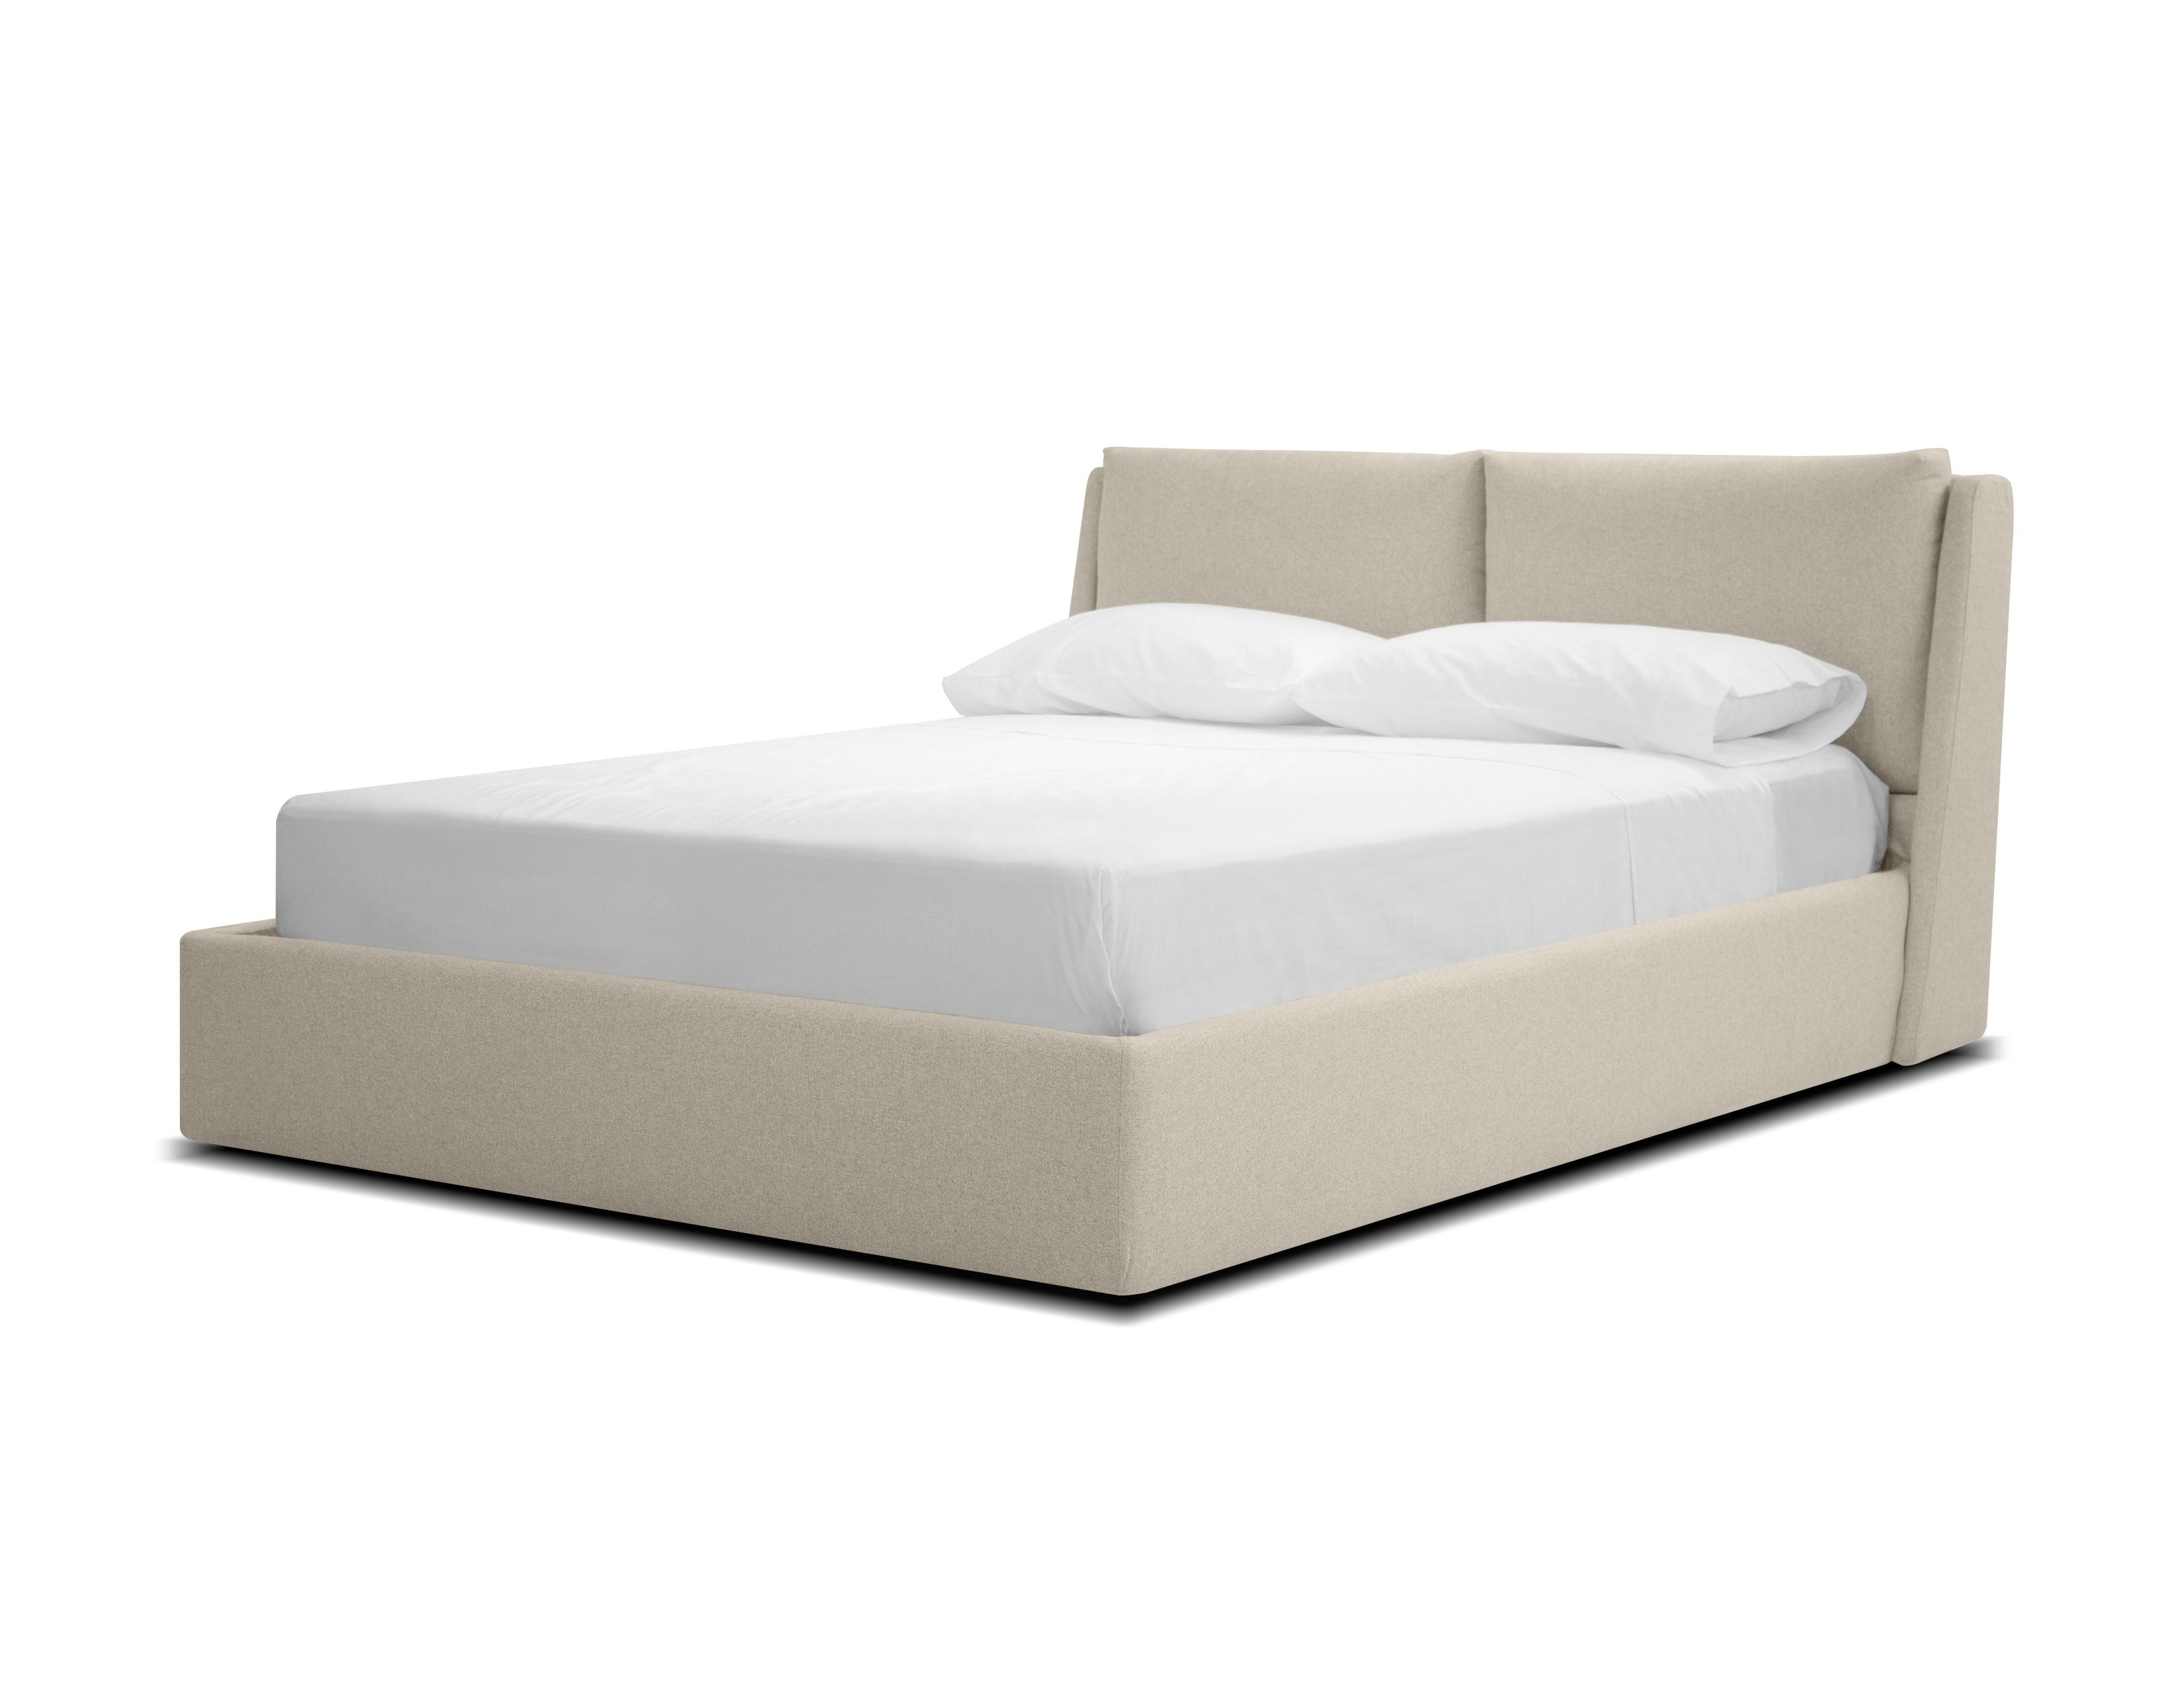 //mobital.ca/cdn/shop/products/BED-CONT-STON-QUEEN.png?v=1707831419&width=360 360w,//mobital.ca/cdn/shop/products/BED-CONT-STON-QUEEN.png?v=1707831419&width=375 375w,//mobital.ca/cdn/shop/products/BED-CONT-STON-QUEEN.png?v=1707831419&width=535 535w,//mobital.ca/cdn/shop/products/BED-CONT-STON-QUEEN.png?v=1707831419&width=750 750w,//mobital.ca/cdn/shop/products/BED-CONT-STON-QUEEN.png?v=1707831419&width=1024 1024w,//mobital.ca/cdn/shop/products/BED-CONT-STON-QUEEN.png?v=1707831419&width=1280 1280w,//mobital.ca/cdn/shop/products/BED-CONT-STON-QUEEN.png?v=1707831419&width=1366 1366w,//mobital.ca/cdn/shop/products/BED-CONT-STON-QUEEN.png?v=1707831419&width=1440 1440w,//mobital.ca/cdn/shop/products/BED-CONT-STON-QUEEN.png?v=1707831419&width=1920 1920w,//mobital.ca/cdn/shop/products/BED-CONT-STON-QUEEN.png?v=1707831419&width=2880 2880w